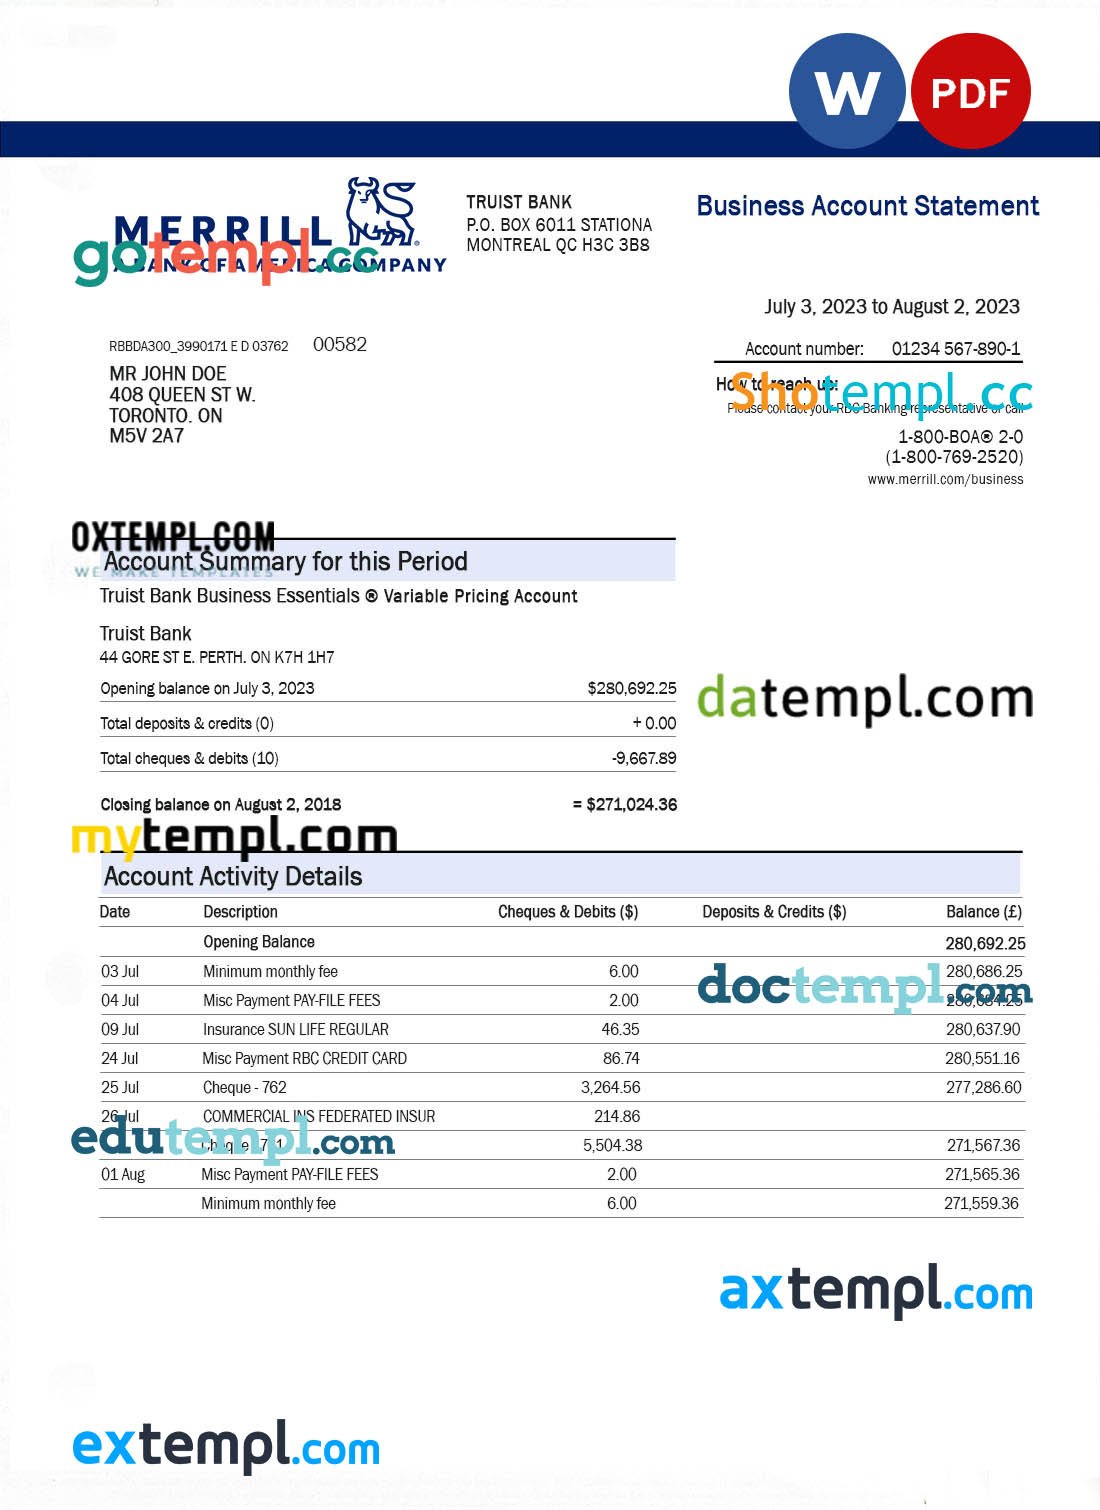 Commerce Bank firm account statement Word and PDF template